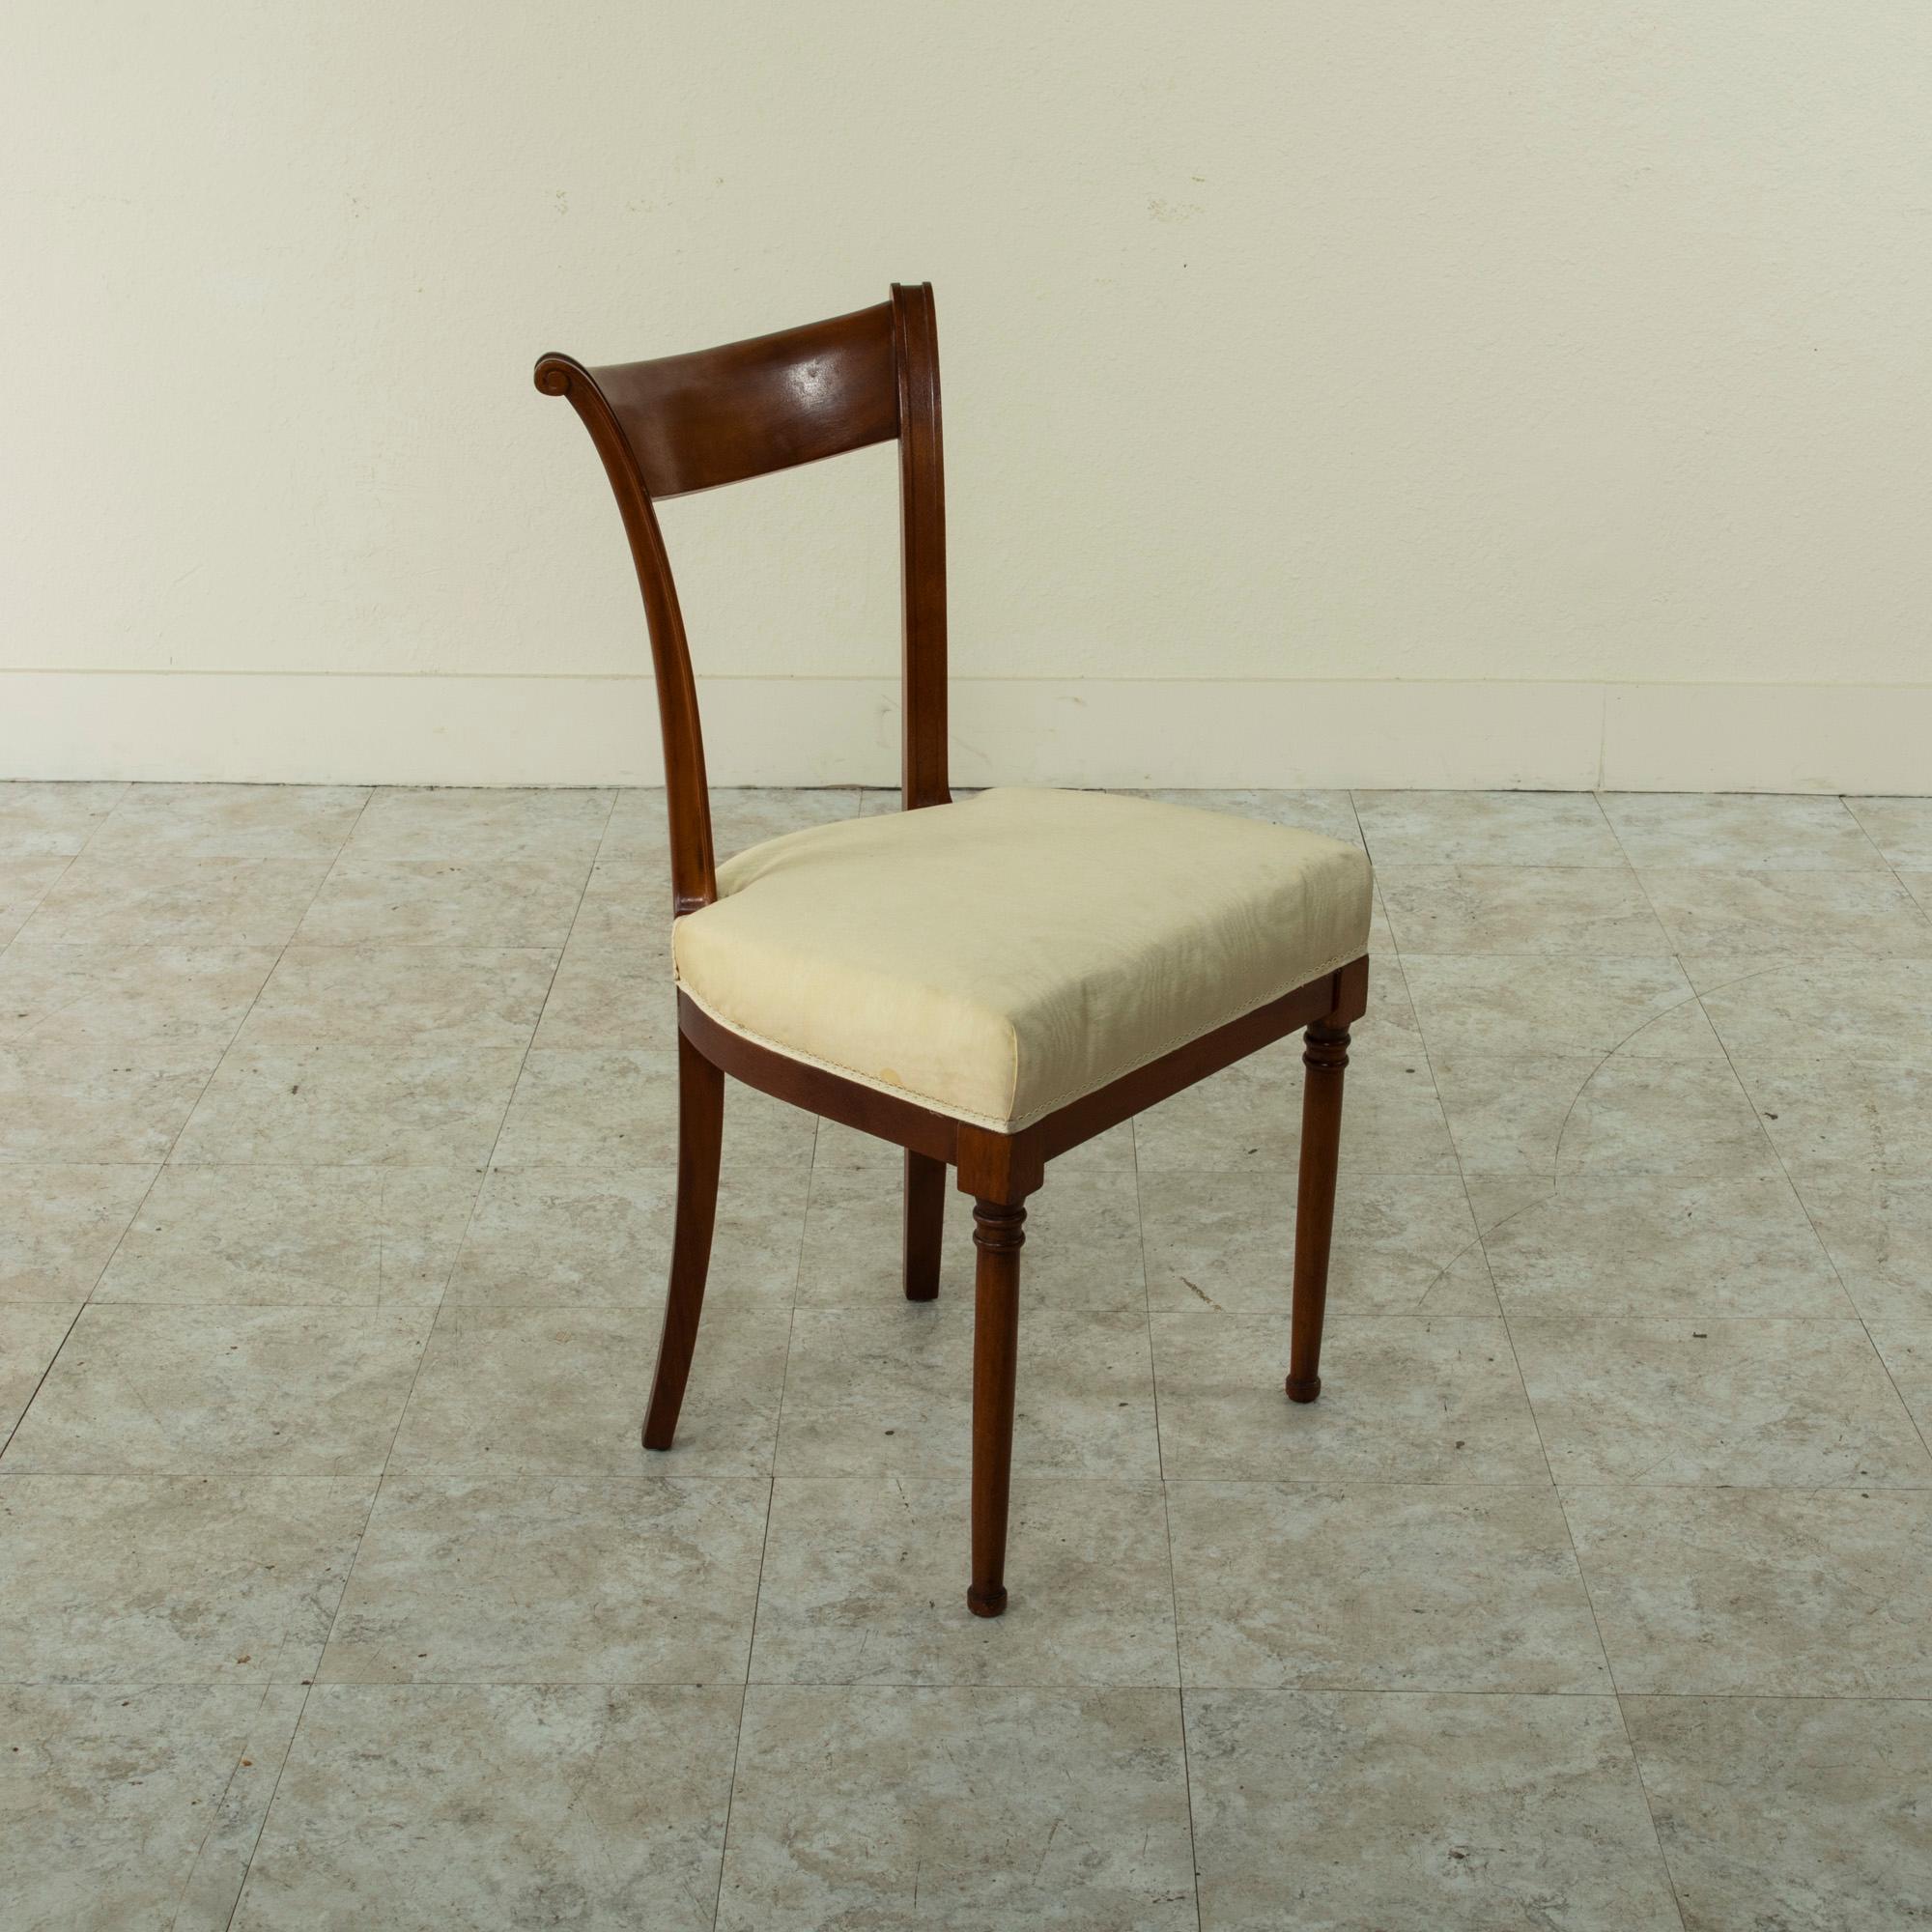 This set of six French Directoire style dining chairs from the mid-20th century are constructed of solid walnut. They feature scrolled seat backs and turned front legs. The square back legs curve gently 